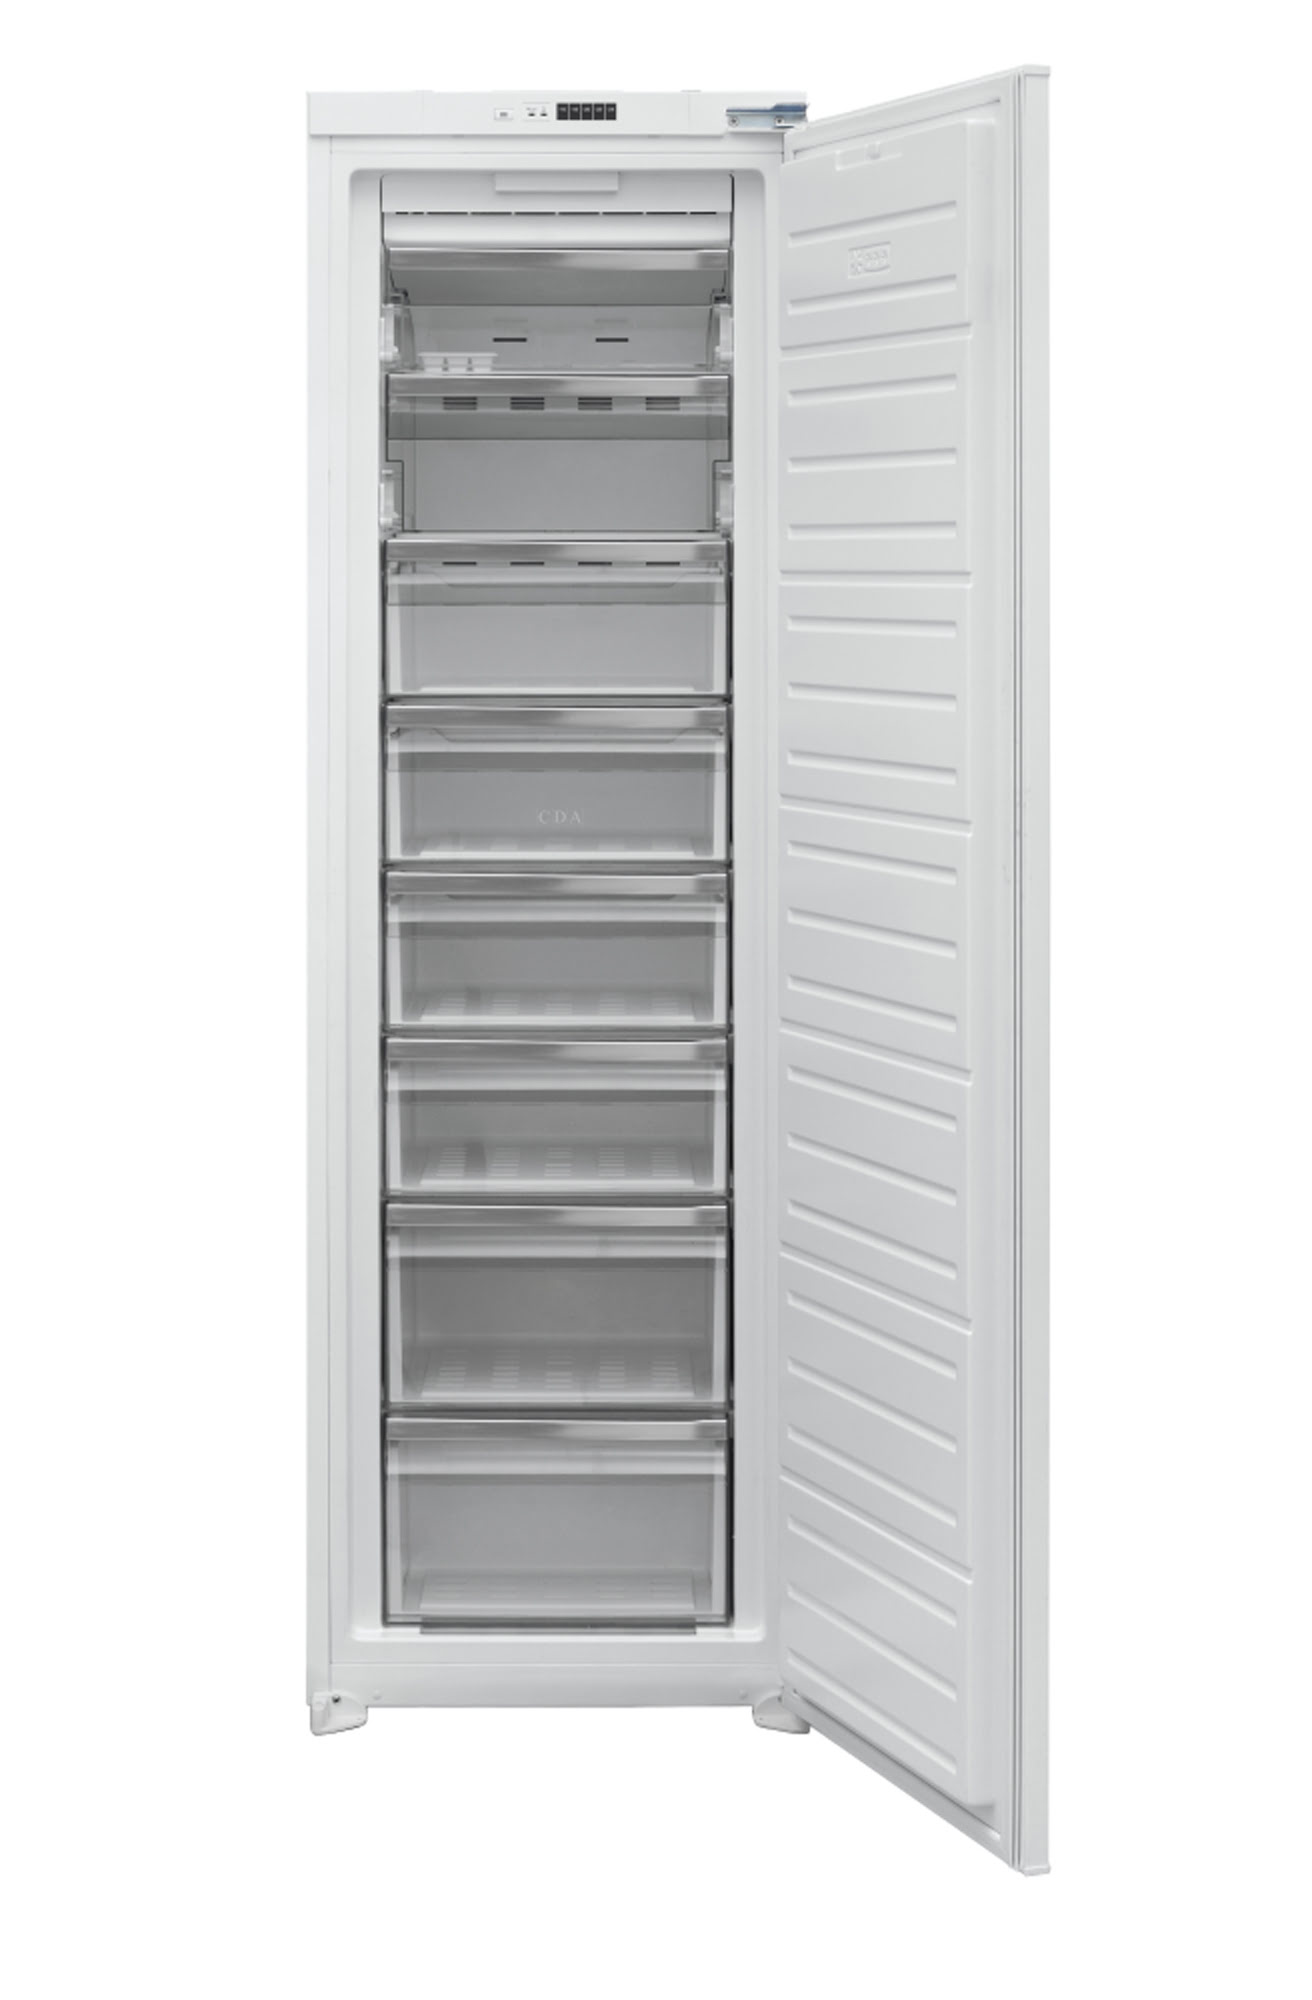 Integrated full height freezer